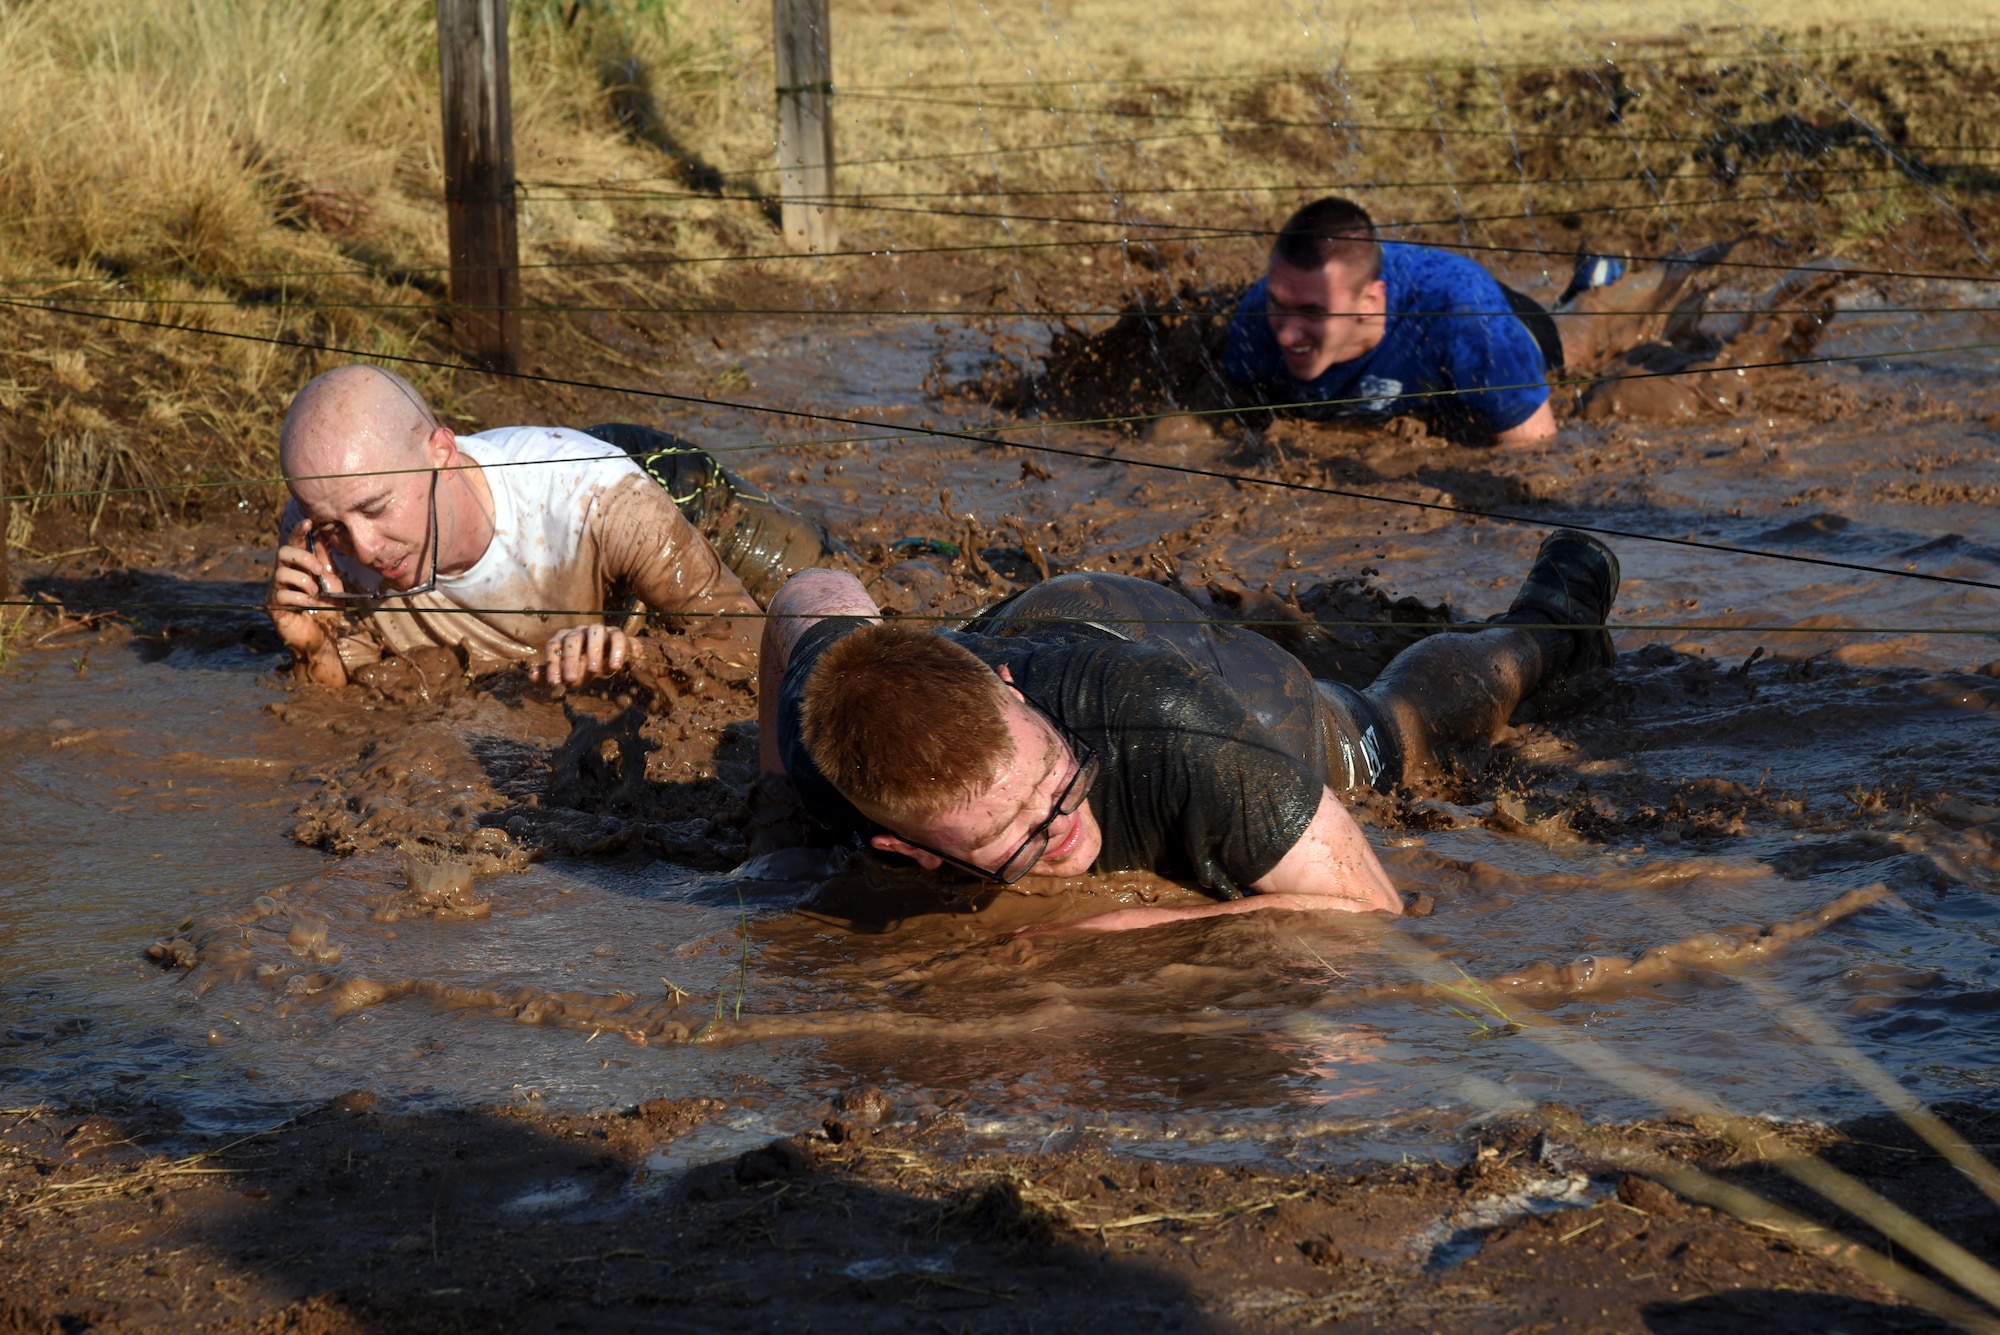 U.S. Army Pvt. Conner McCage, 344th Military Intelligence Battalion trainee, leads some other soldiers through a low crawl during the 344th MI BN mud run at the Camp Sentinel training area on Goodfellow Air Force Base, Texas, July 7, 2018. This was the 344th MI BN’s first ever mud run. (U.S. Air Force photo by Staff Sgt. Joshua Edwards/Released)